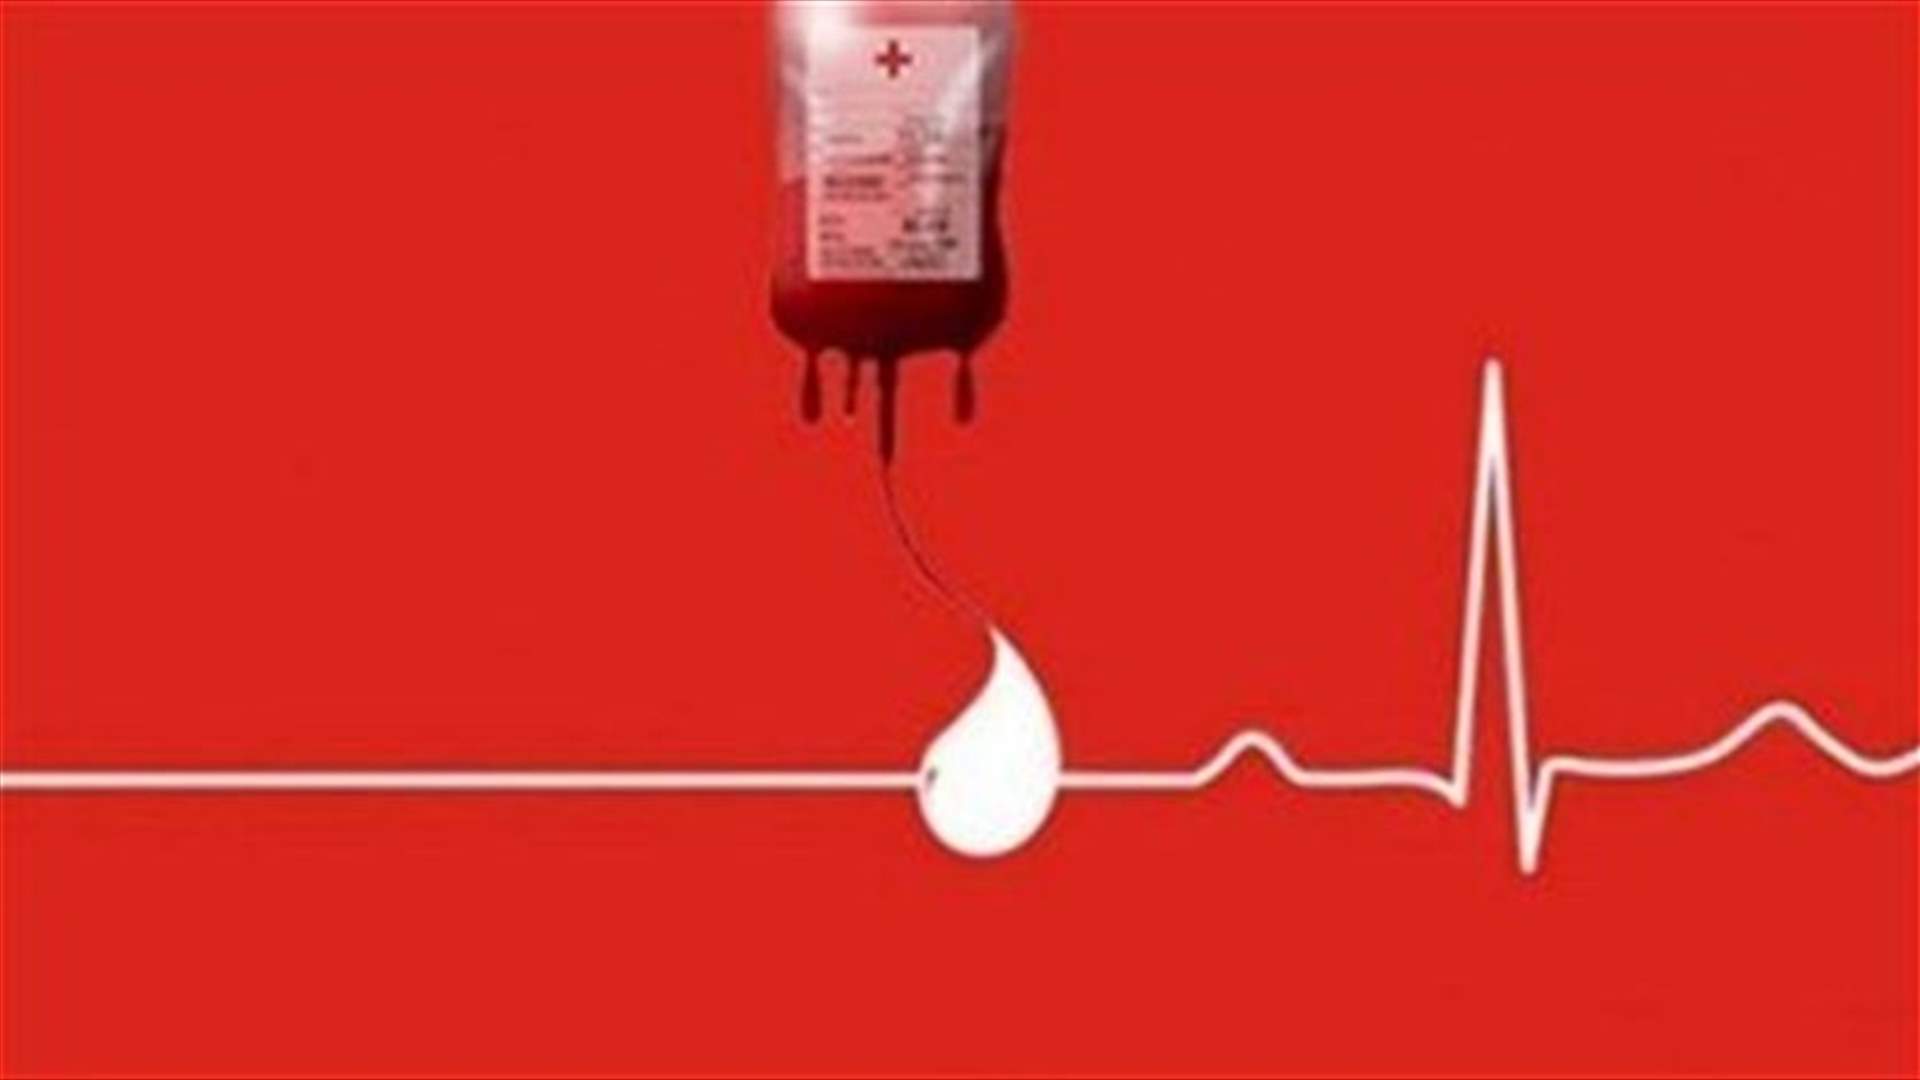 A patient at AUBMC urgently needs O- blood unit. To donate, please call: 03/209703